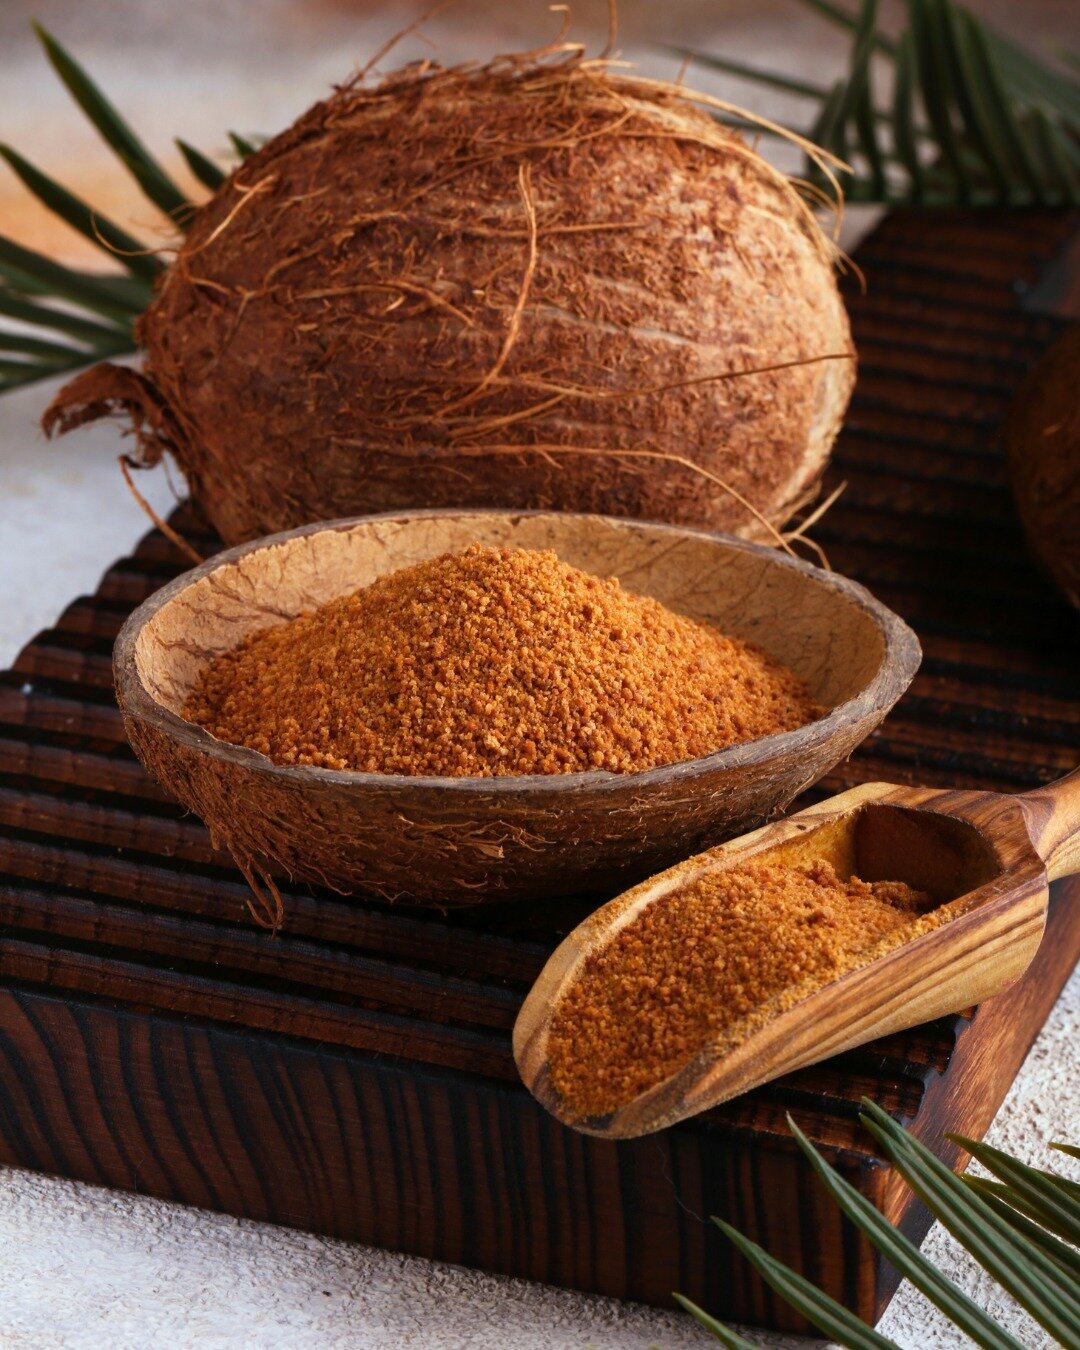 Sweeten your life with coconut sugar 🥥 Rich in nutrients and low on the glycemic index, it's the perfect natural alternative 🌴

#communityfoodscairns #organicfoodcairns #plasticfreeshopping #SustainableFood #BulkFoodStore #EthicalFood #OrganicFoodC